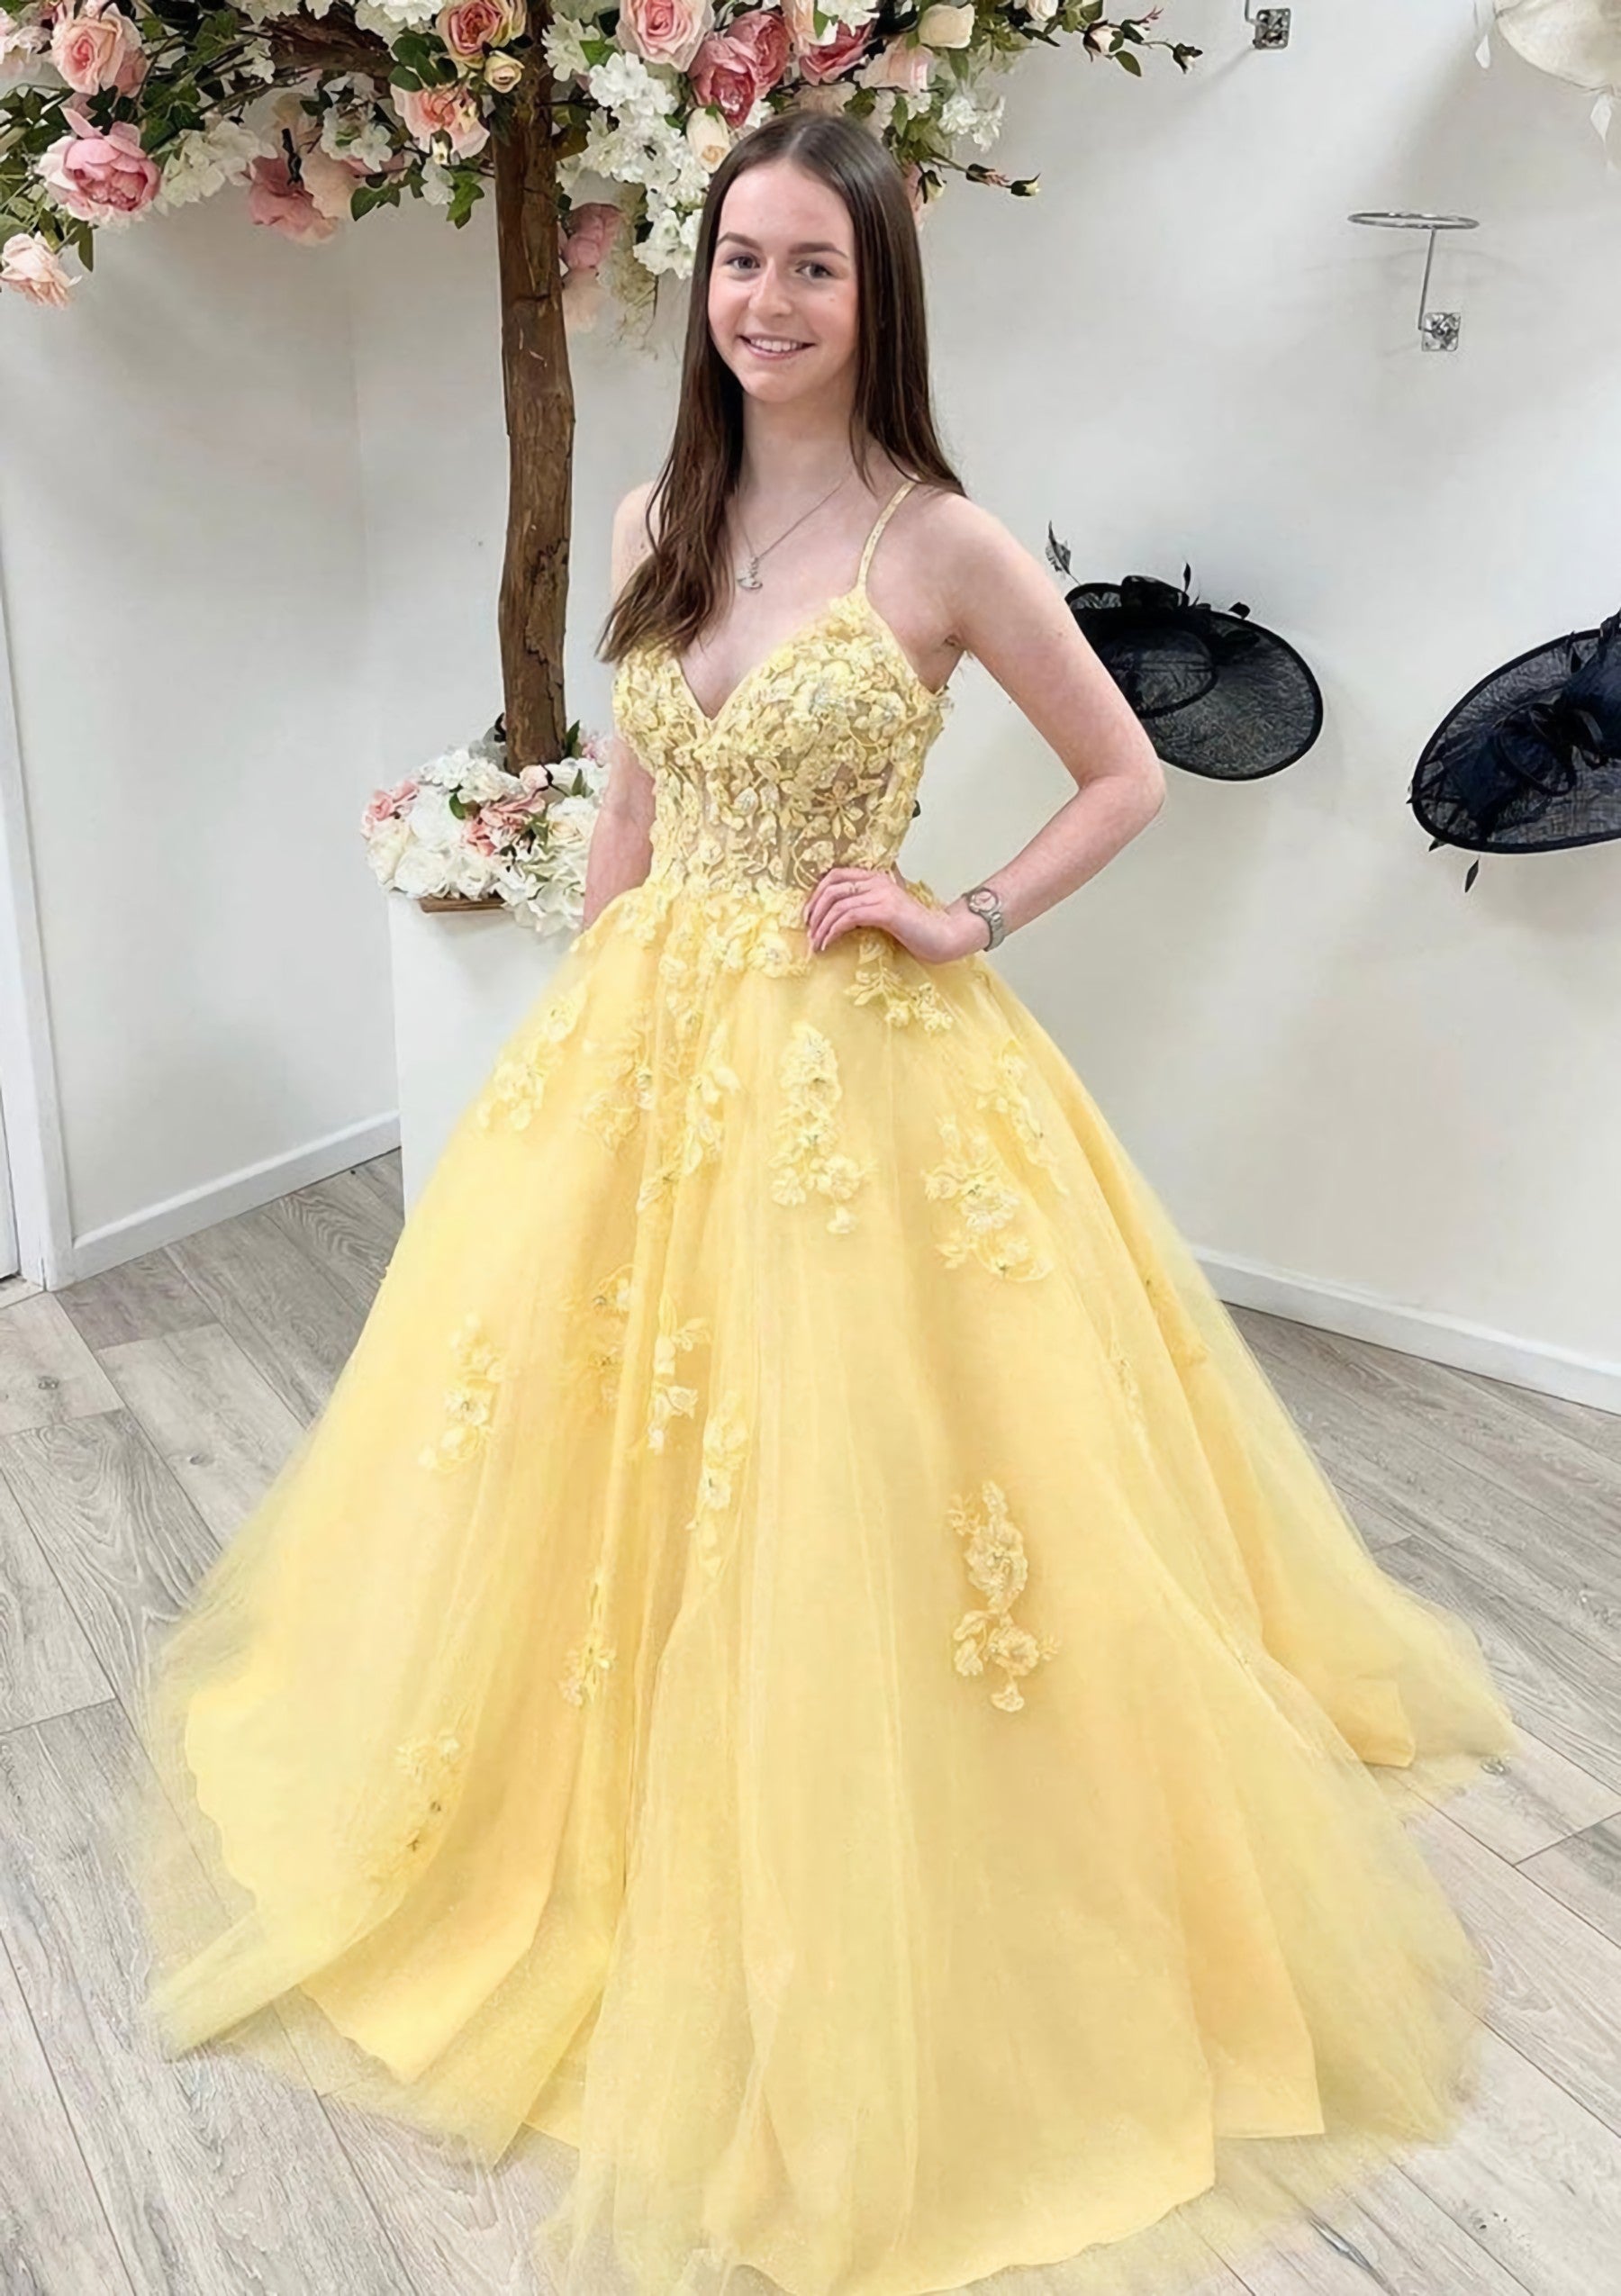 A-line Princess V Neck Sleeveless Sweep Train Tulle Corset Prom Dress With Appliqued Beading Lace outfits, Bridesmaid Dress Colorful